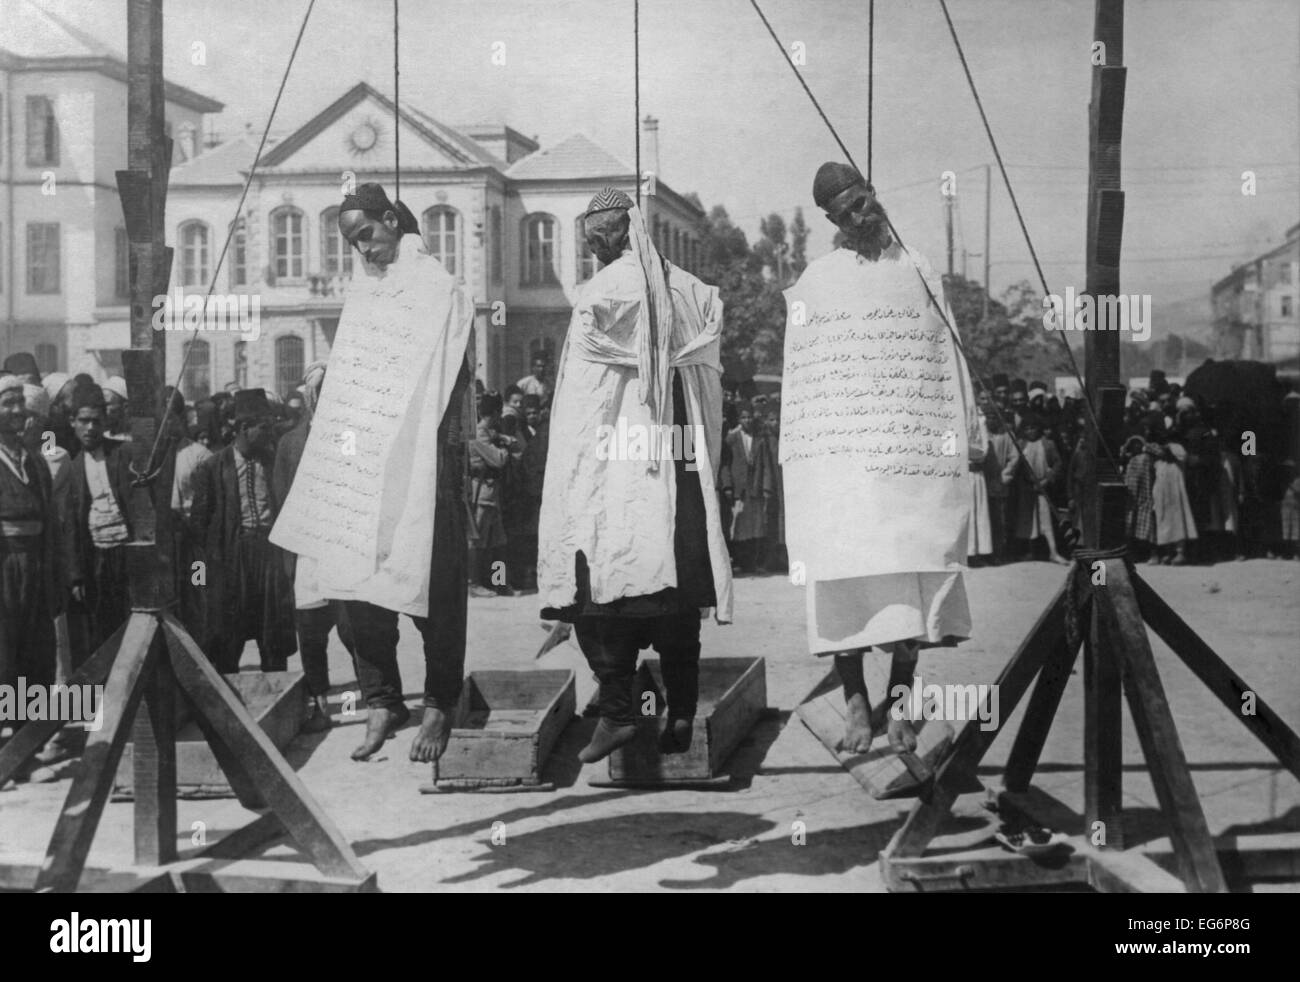 Triple hanging of Druse 'bandits' in Marjeh Square, Damascus, for the murder of French officers. The image may be related to Stock Photo